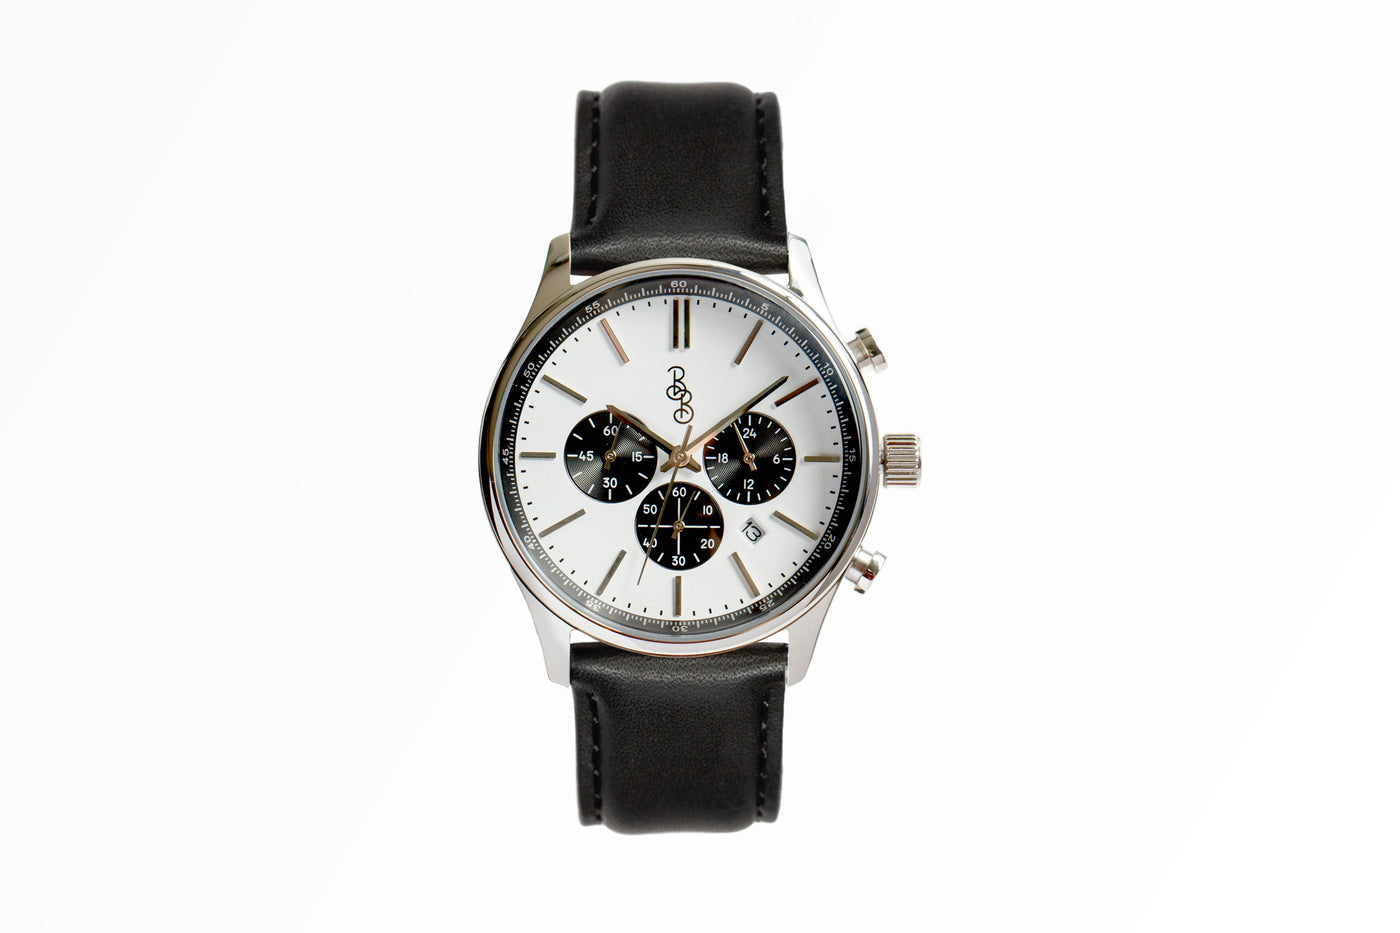 The Beyond Boring Watch Company 41mm White and Black Chronograph